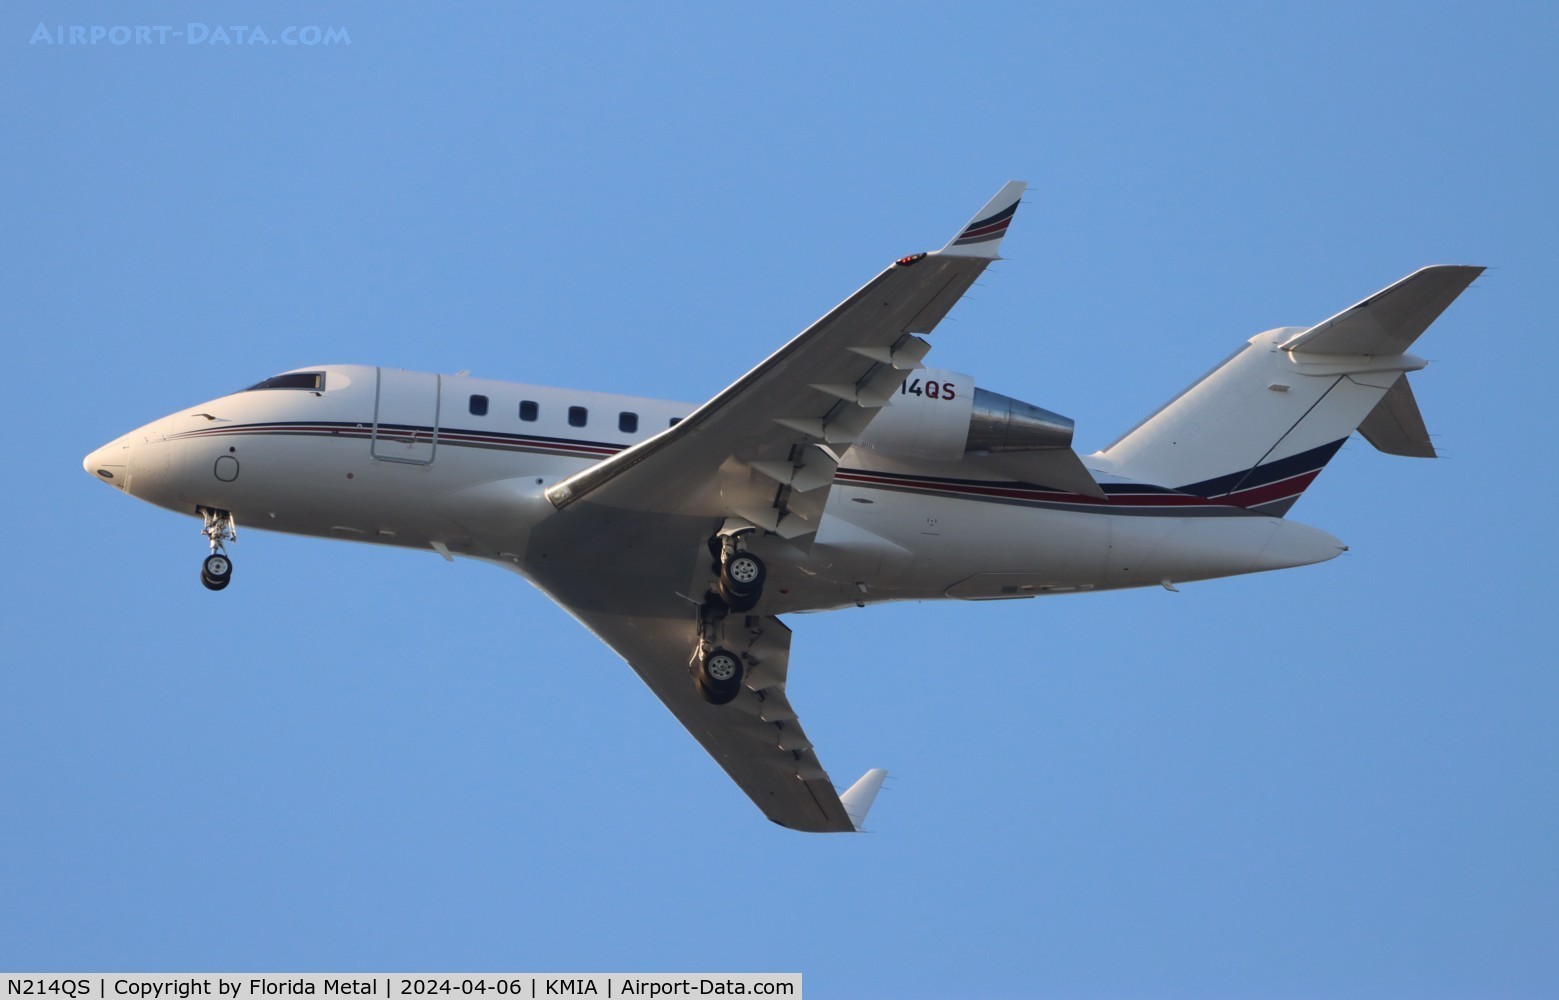 N214QS, 2016 Bombardier Challenger 650 (CL-600-2B16) C/N 6072, NetJets Challenger 650 zx  DAL-MIA    [data has been submitted for correction to show this is a 650 and not 604]